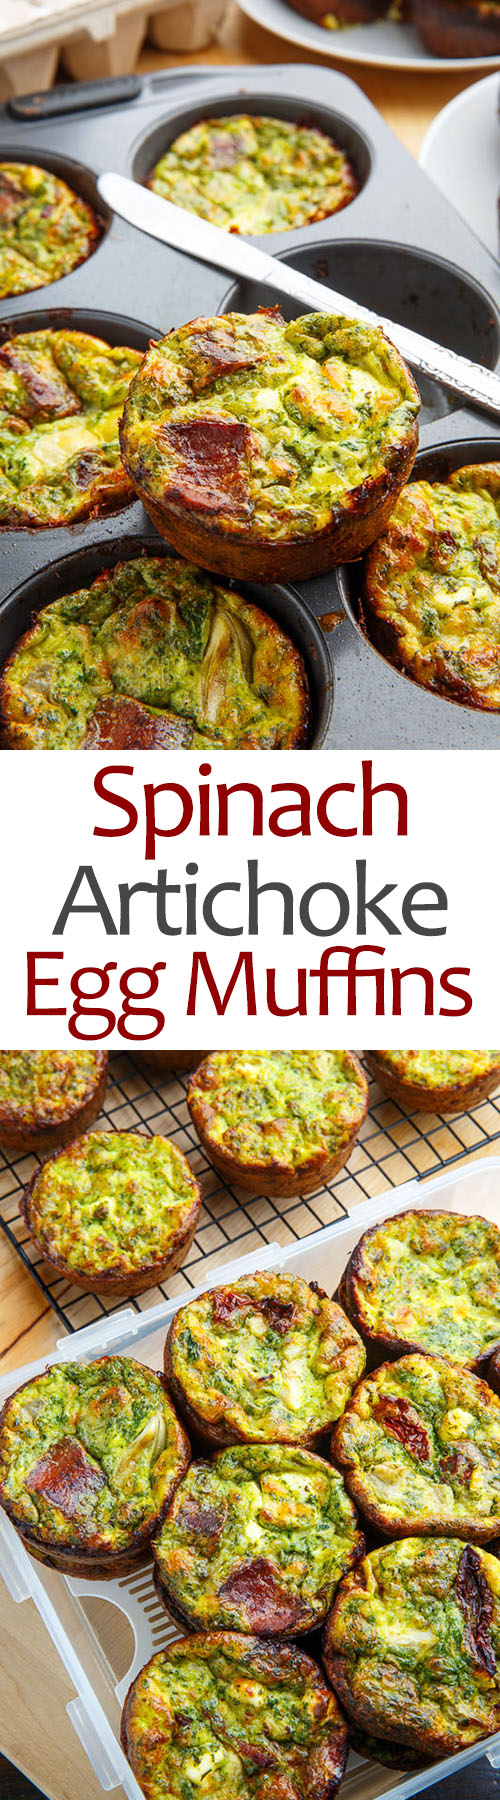 Spinach and Artichoke Egg Muffins with Bacon